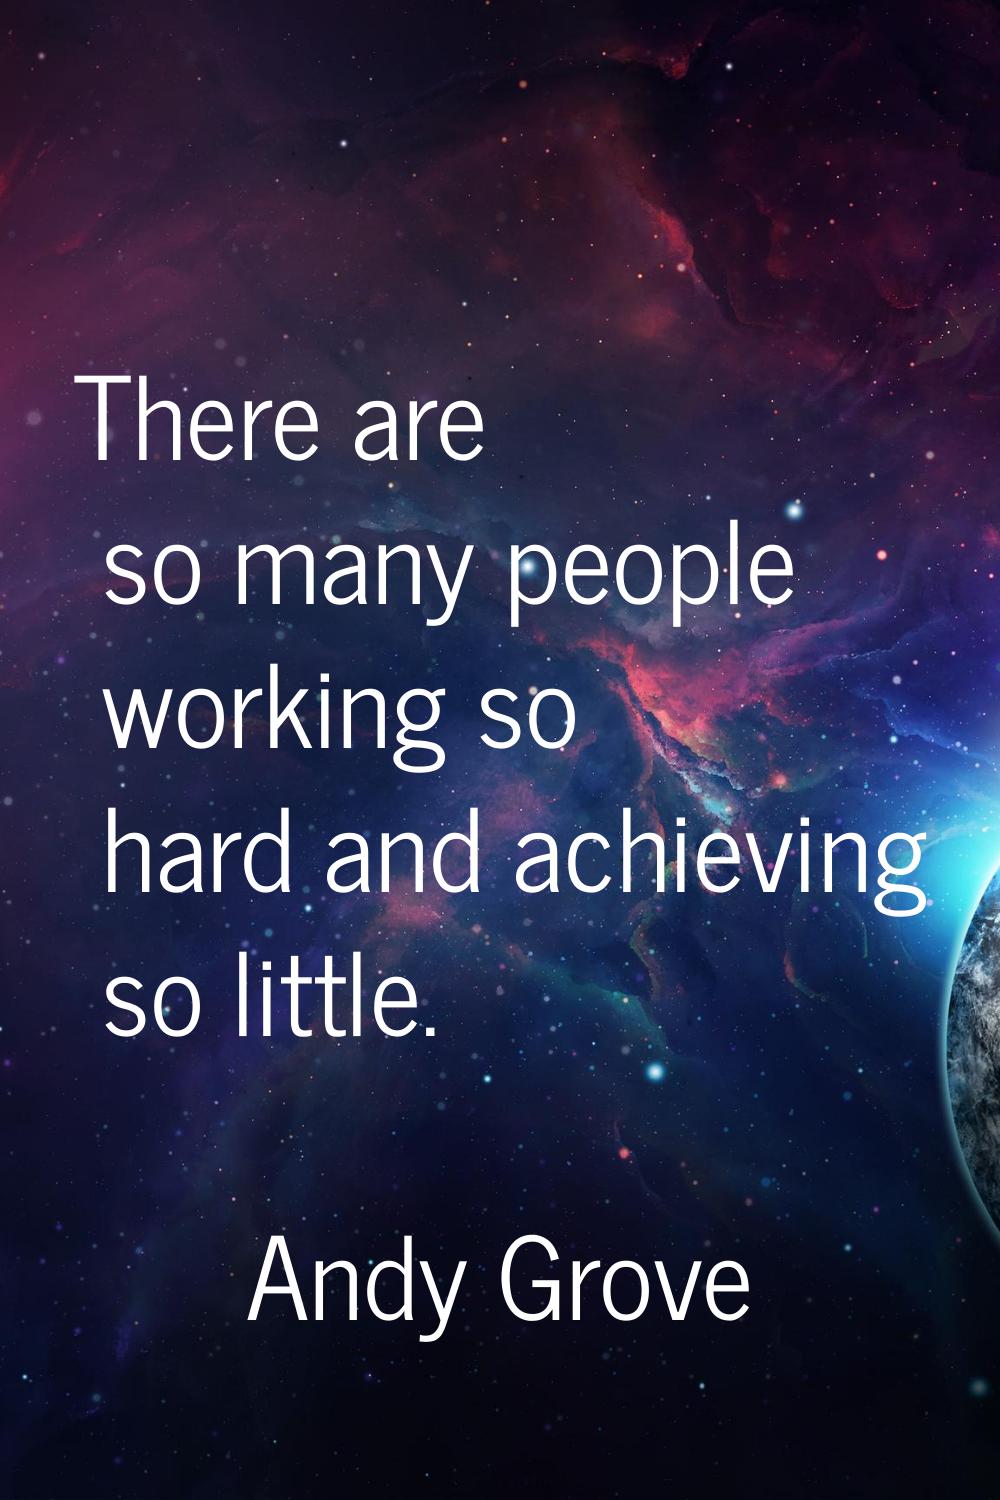 There are so many people working so hard and achieving so little.